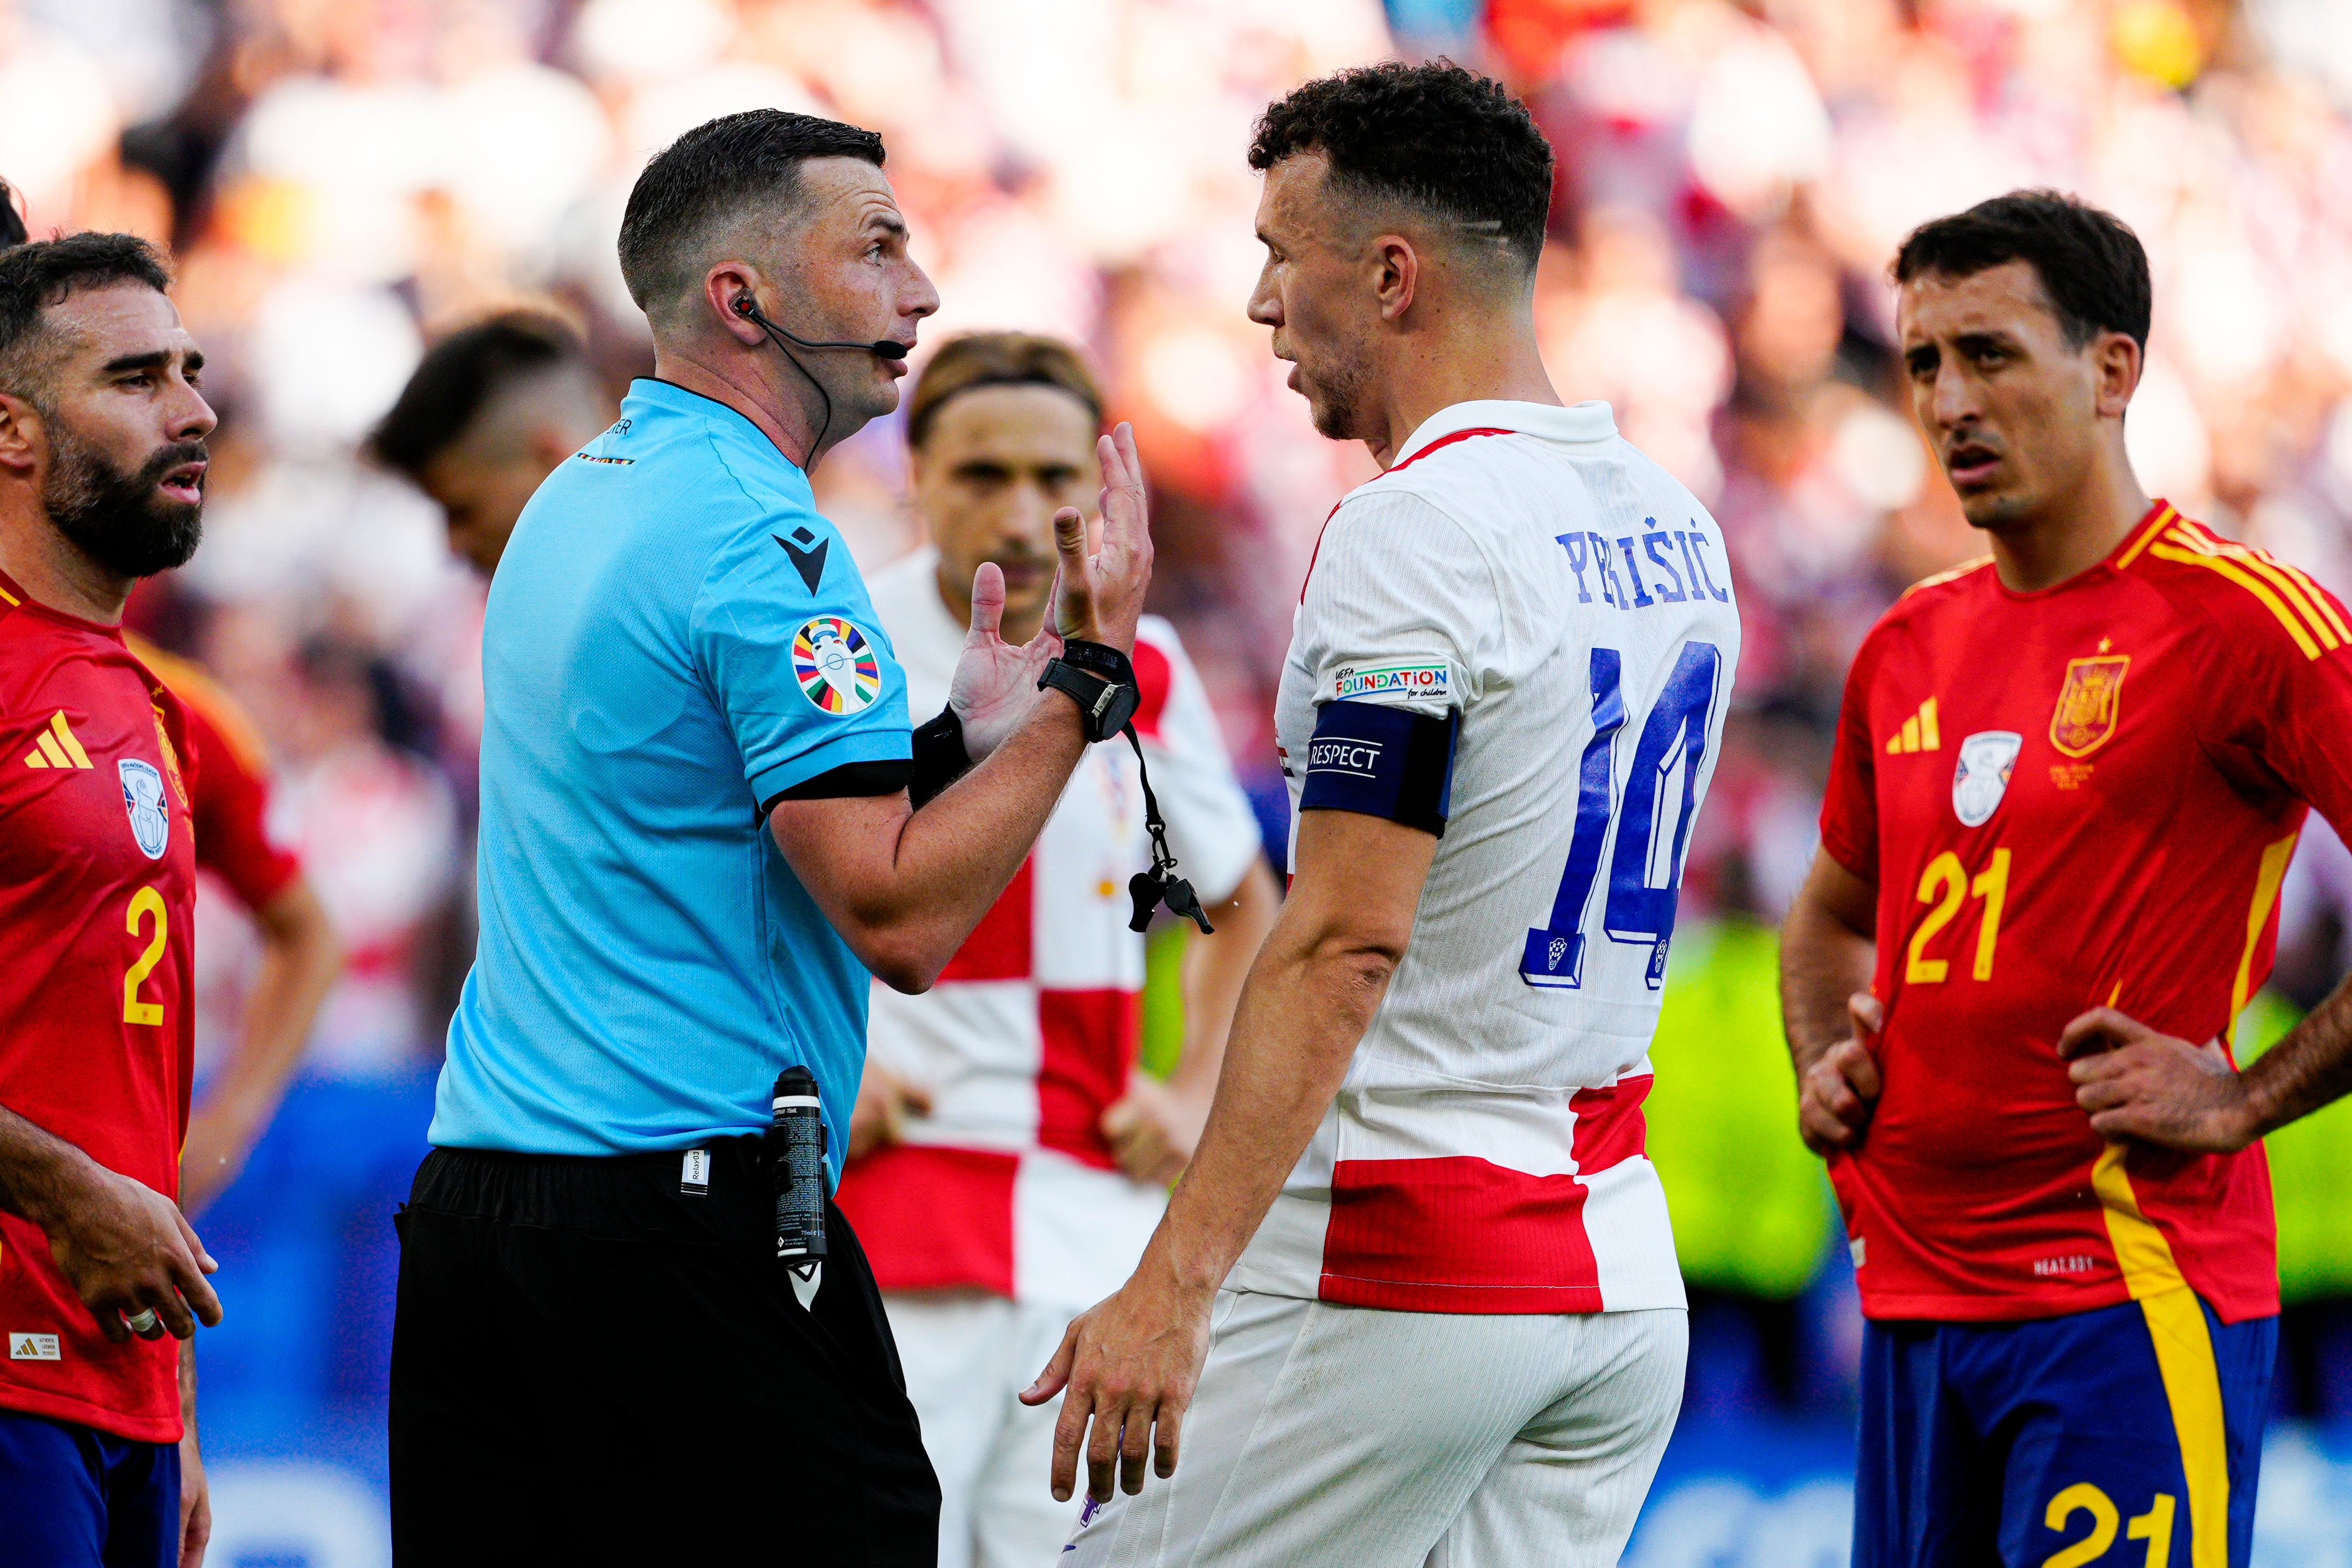 Michael Oliver was involved in late controversy